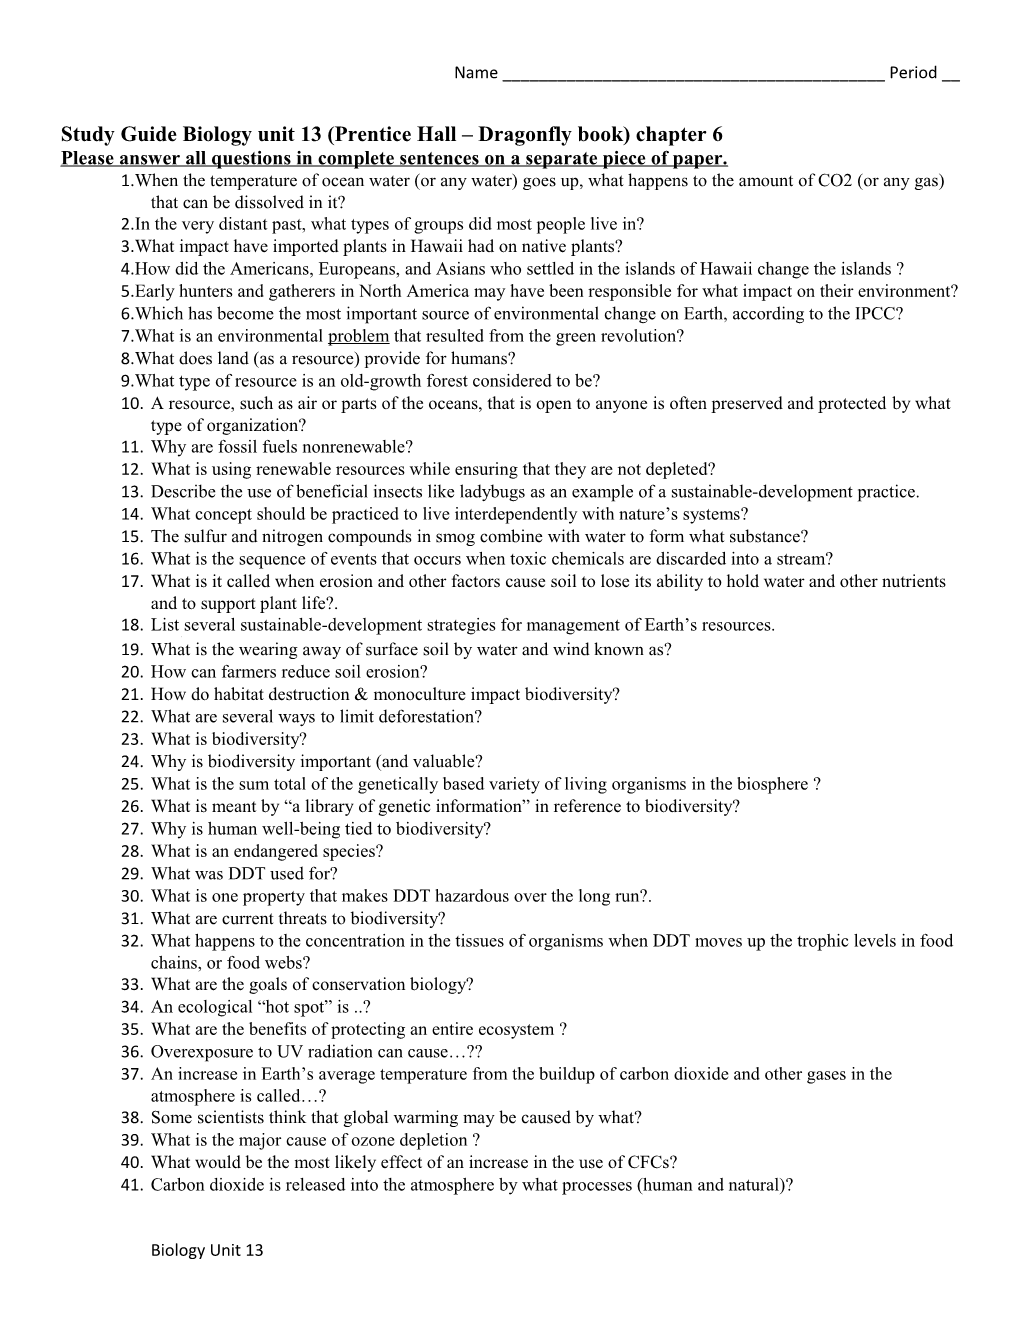 Study Guide Biology Unit 13 (Prentice Hall Dragonfly Book) Chapter 6